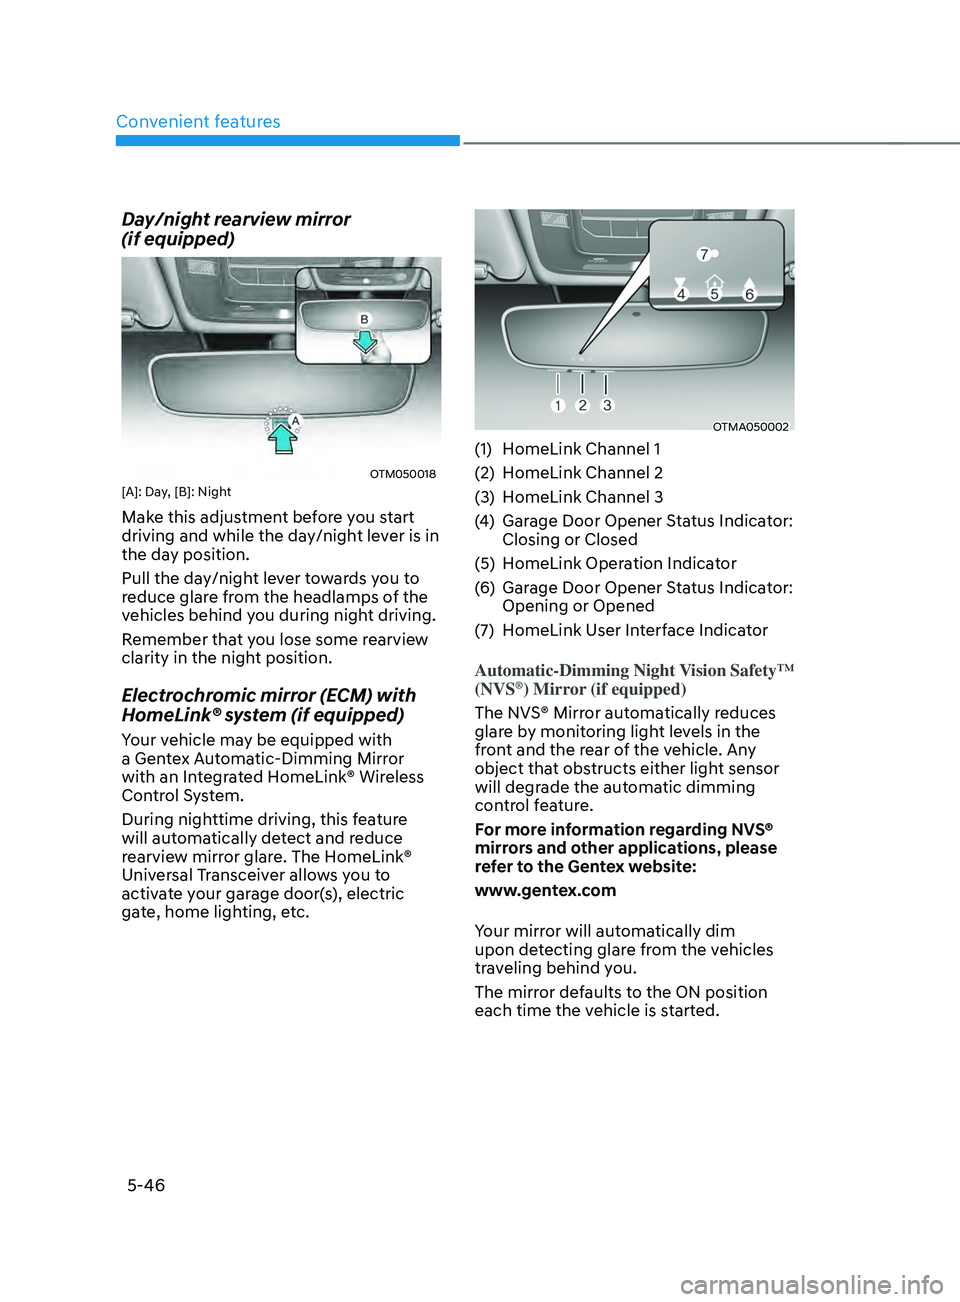 HYUNDAI SANTA FE 2021  Owners Manual Convenient features
5-46
Day/night rearview mirror  
(if equipped)
OTM050018[A]: Day, [B]: Night
Make this adjustment before you start 
driving and while the day/night lever is in 
the day position.
P